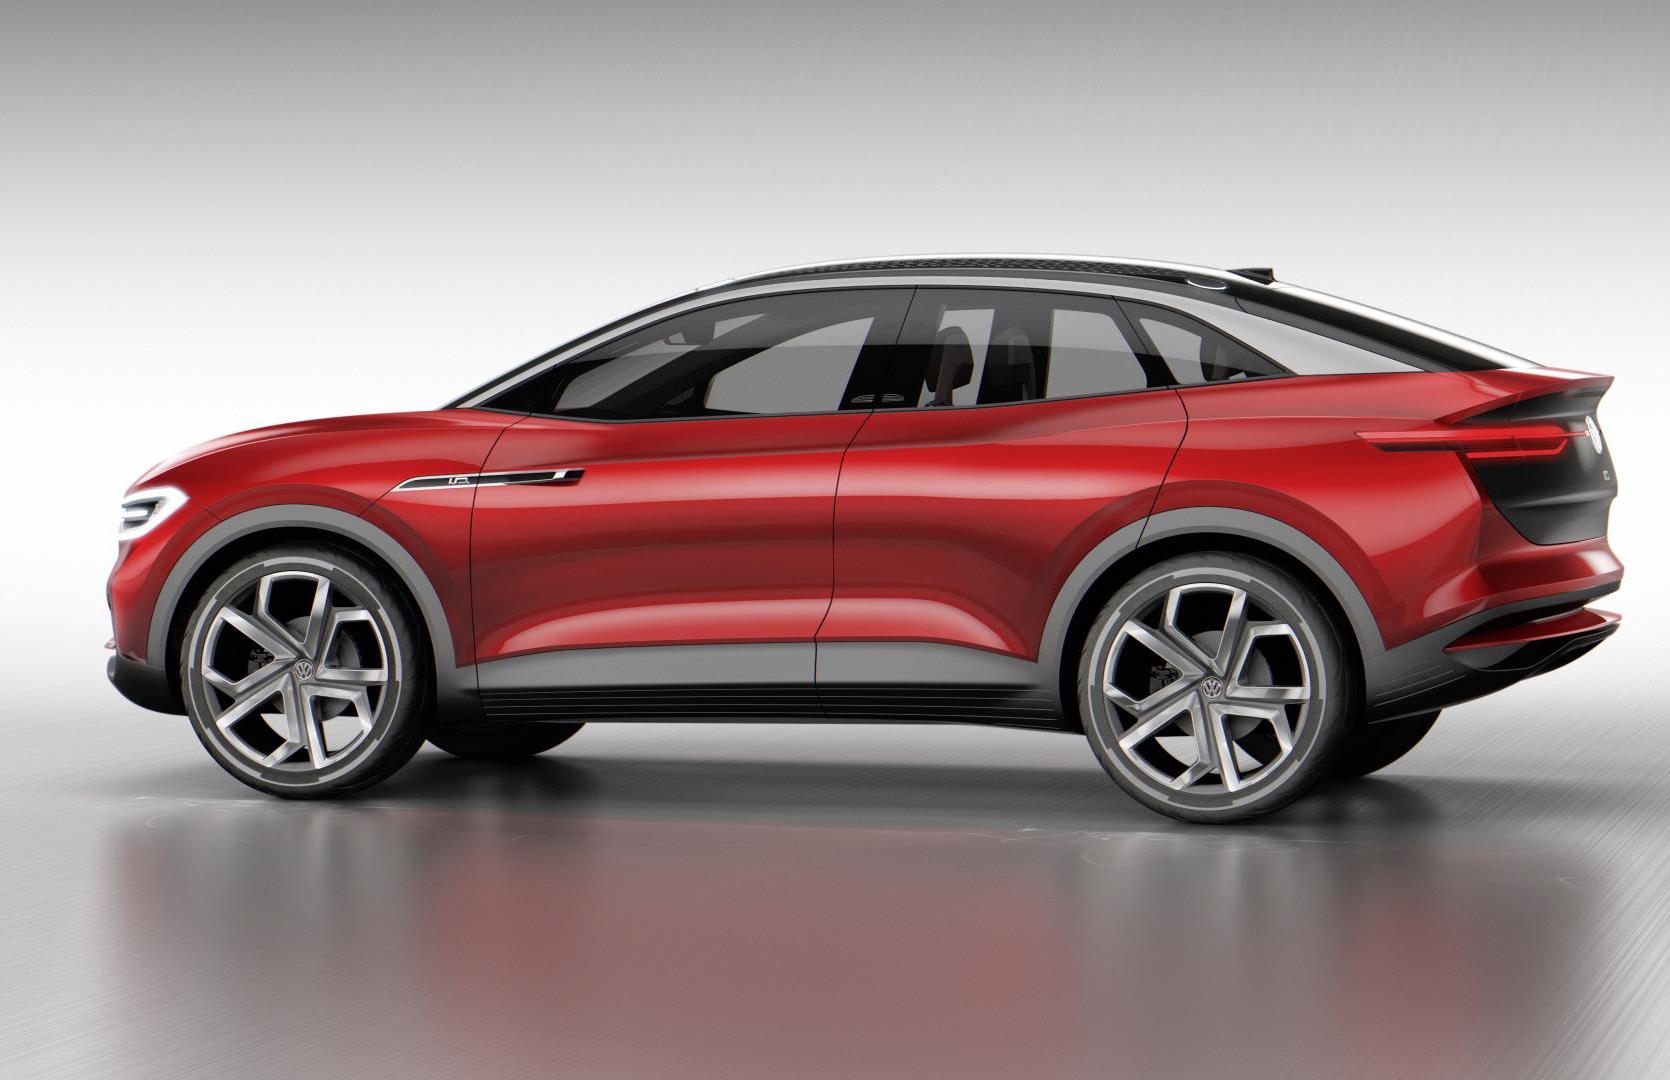 Volkswagen I.D. CROZZ updated, gets ready for 2020 production